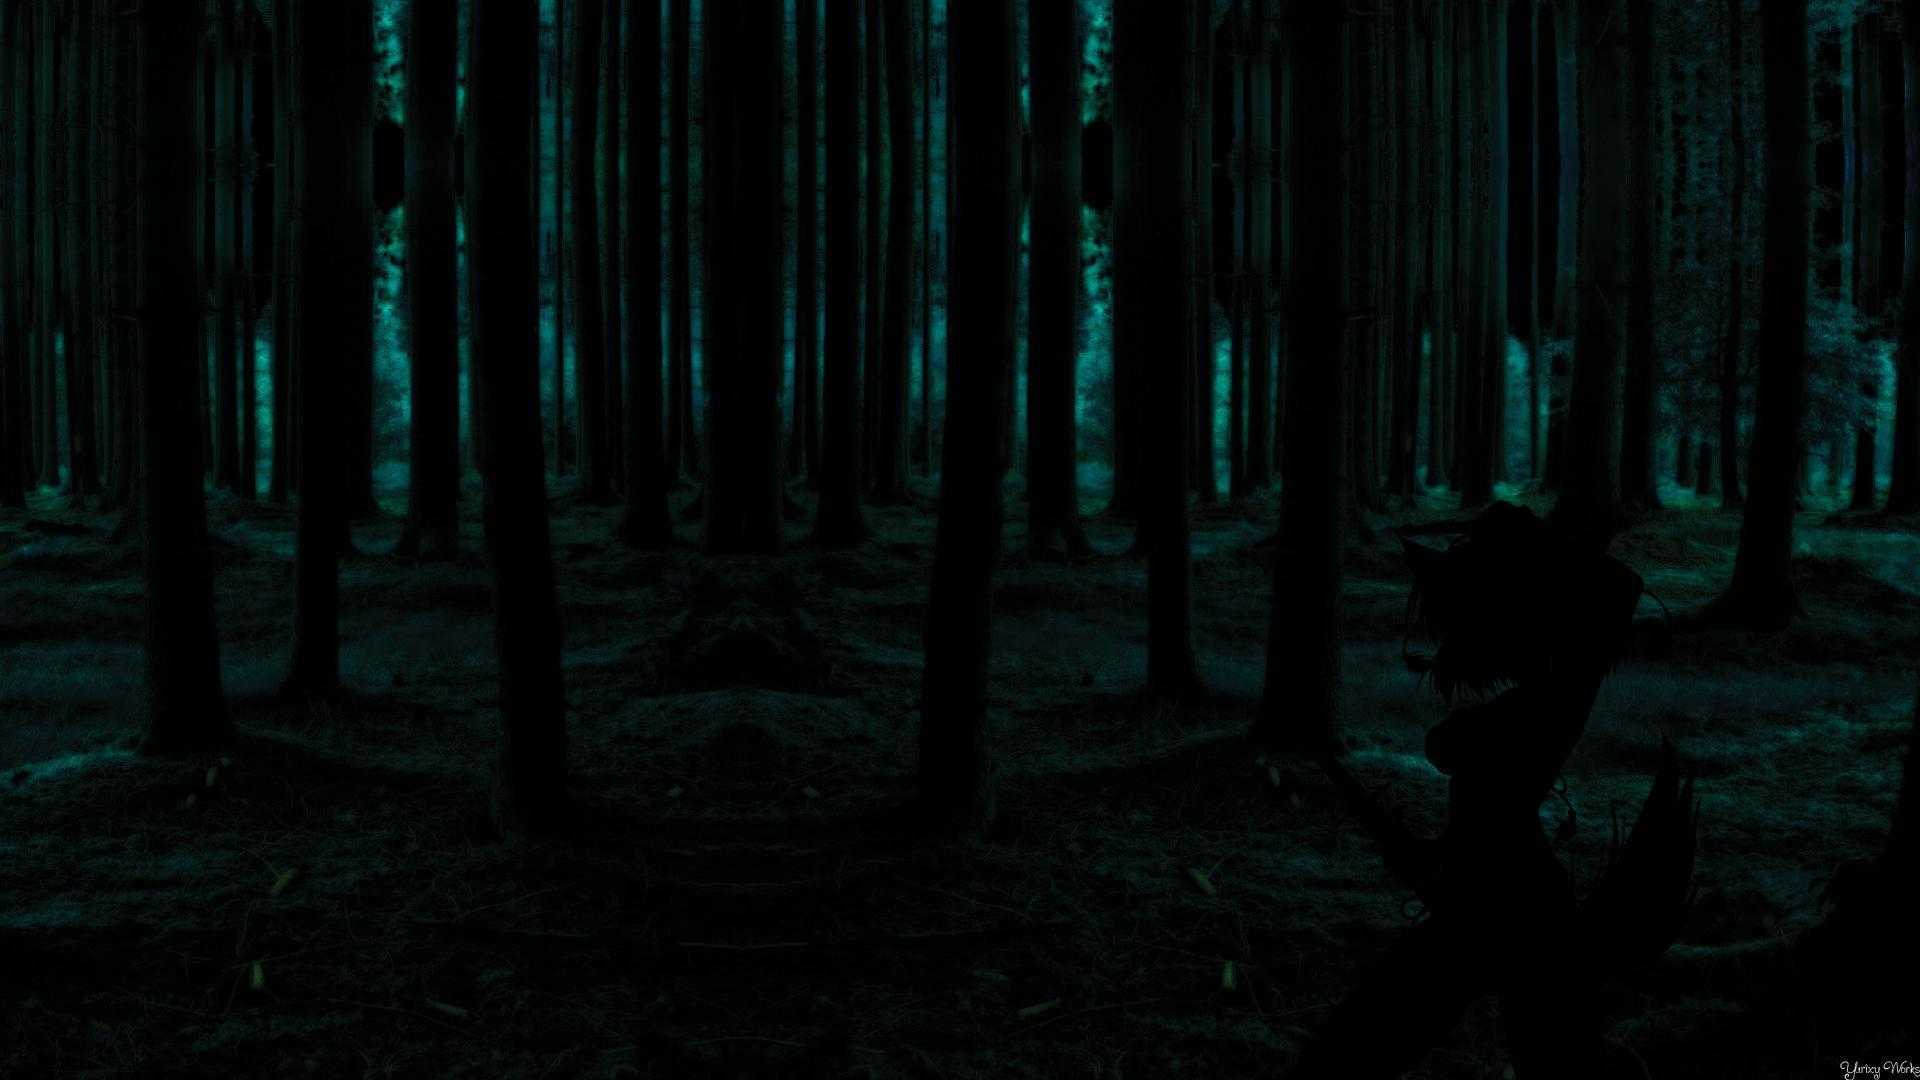 Dark Forest Wallpaper Widescreen Of Mobile Phones High Quality